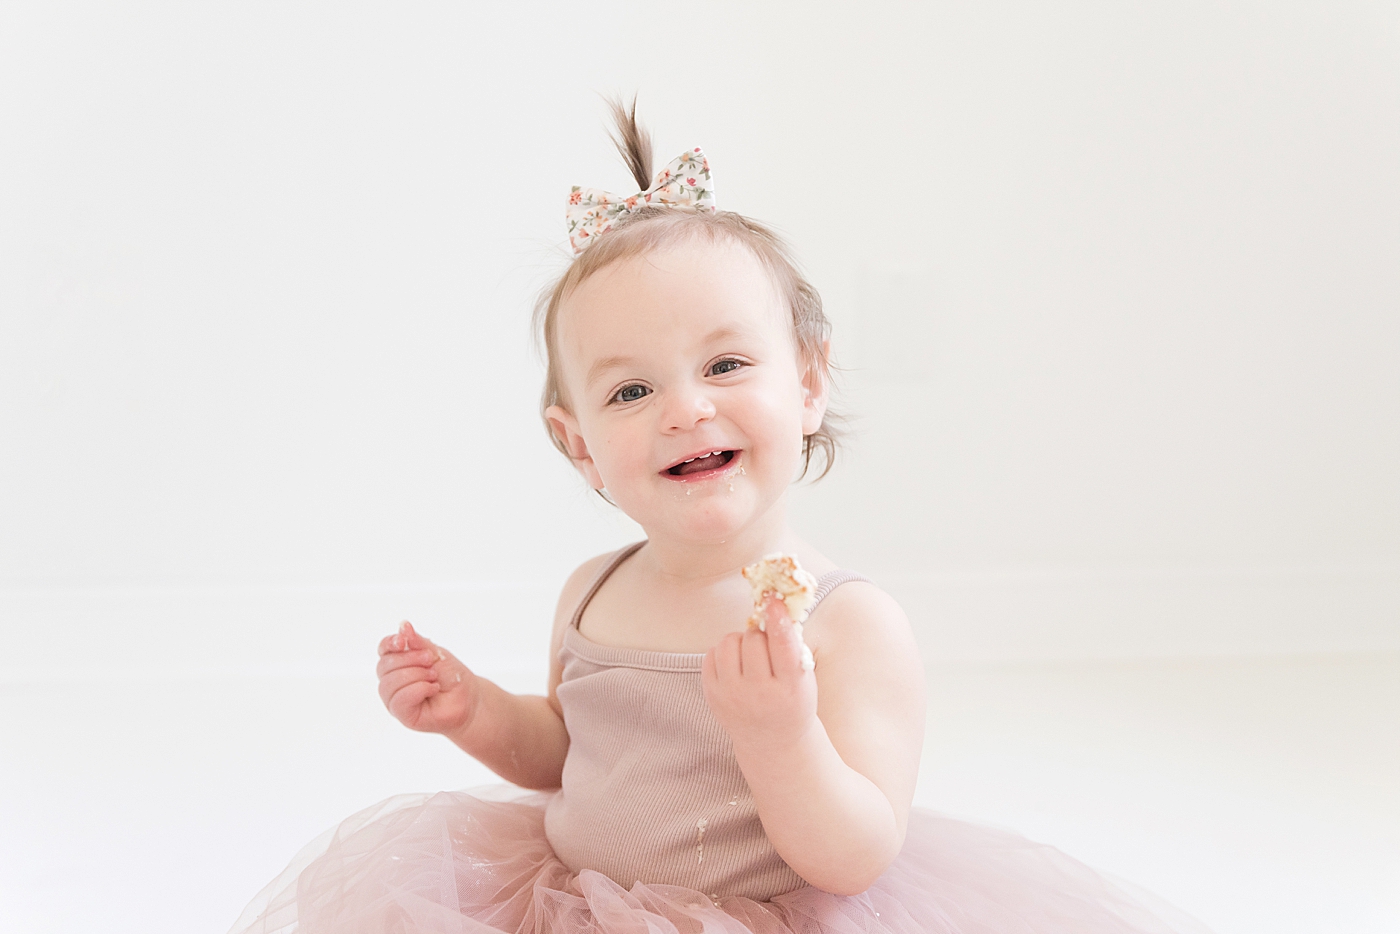 Toddler girl in pink smiling at the camera while eating cake| Photo by Anna Wisjo Photography